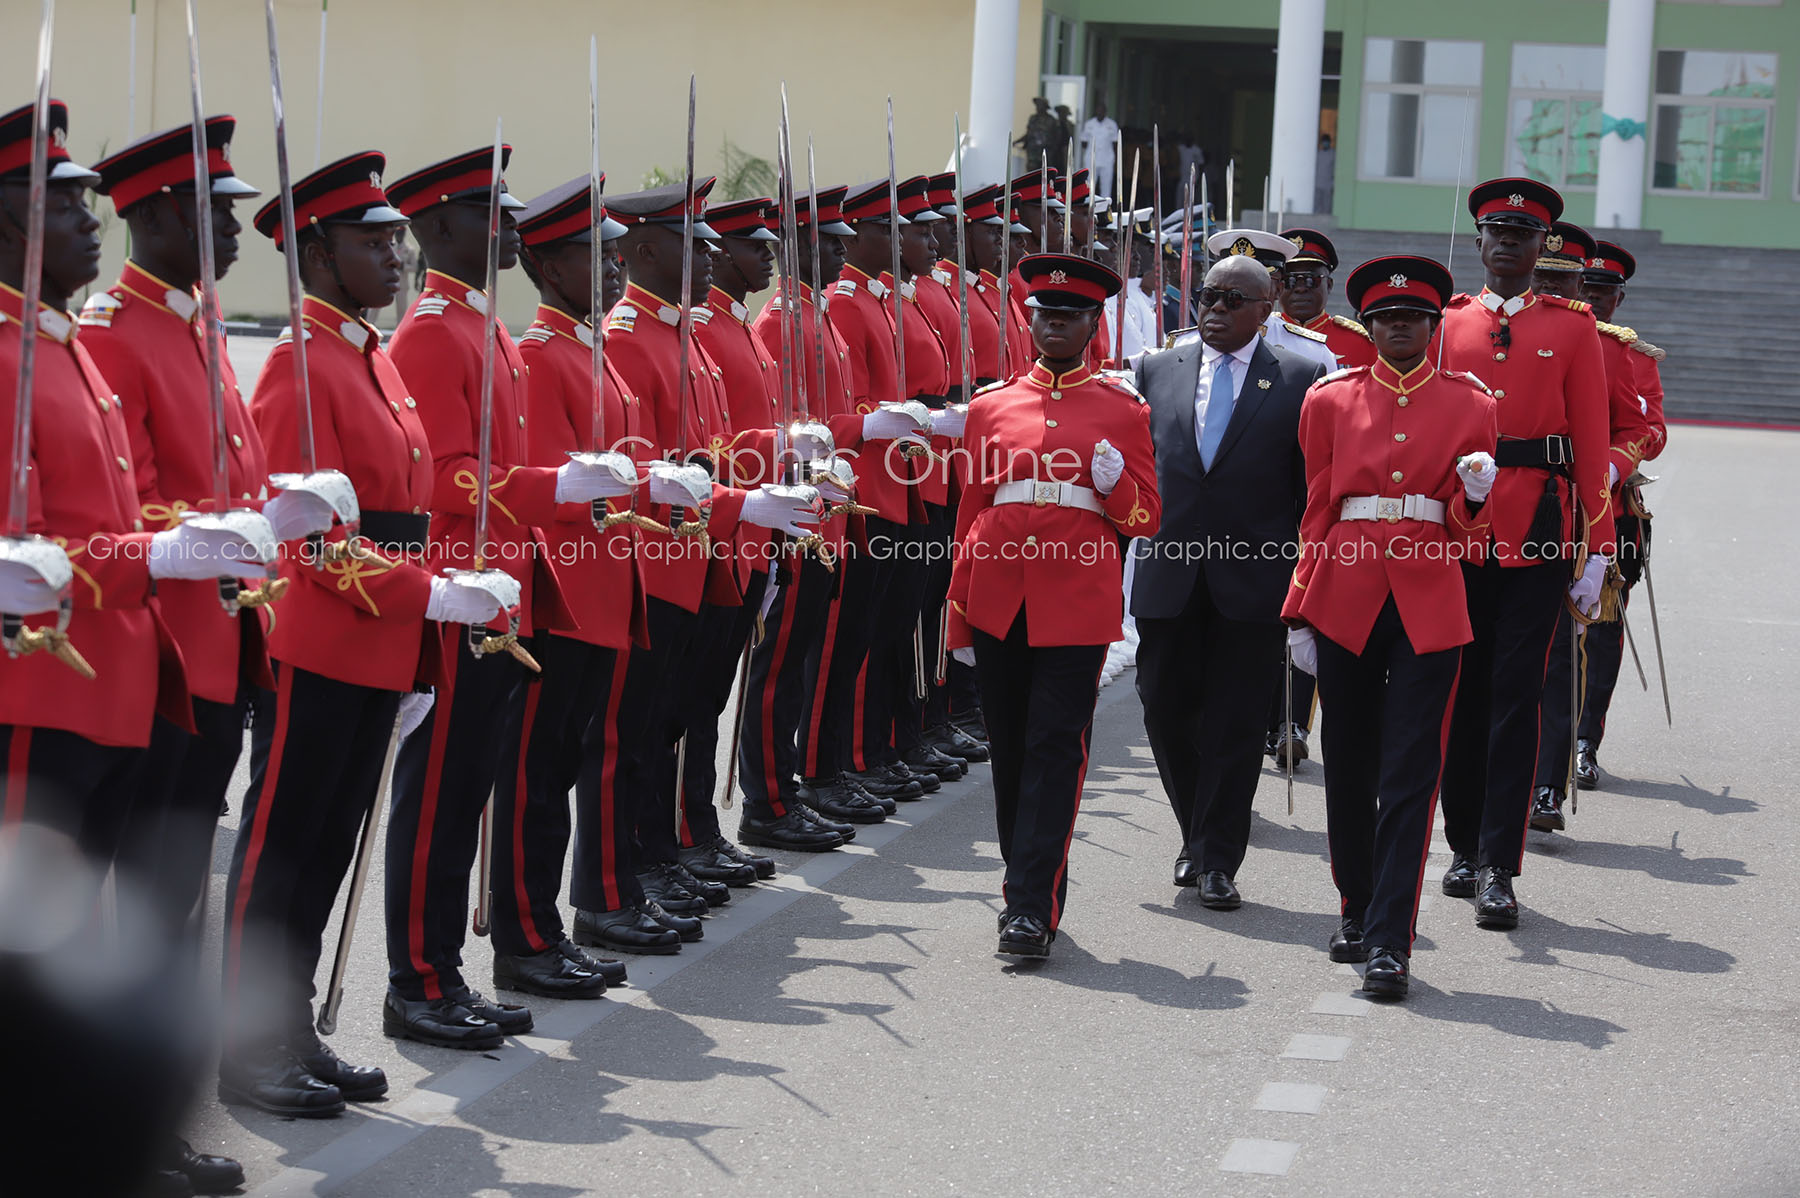 Ghana Armed Forces manpower to be expanded to deal with security threats